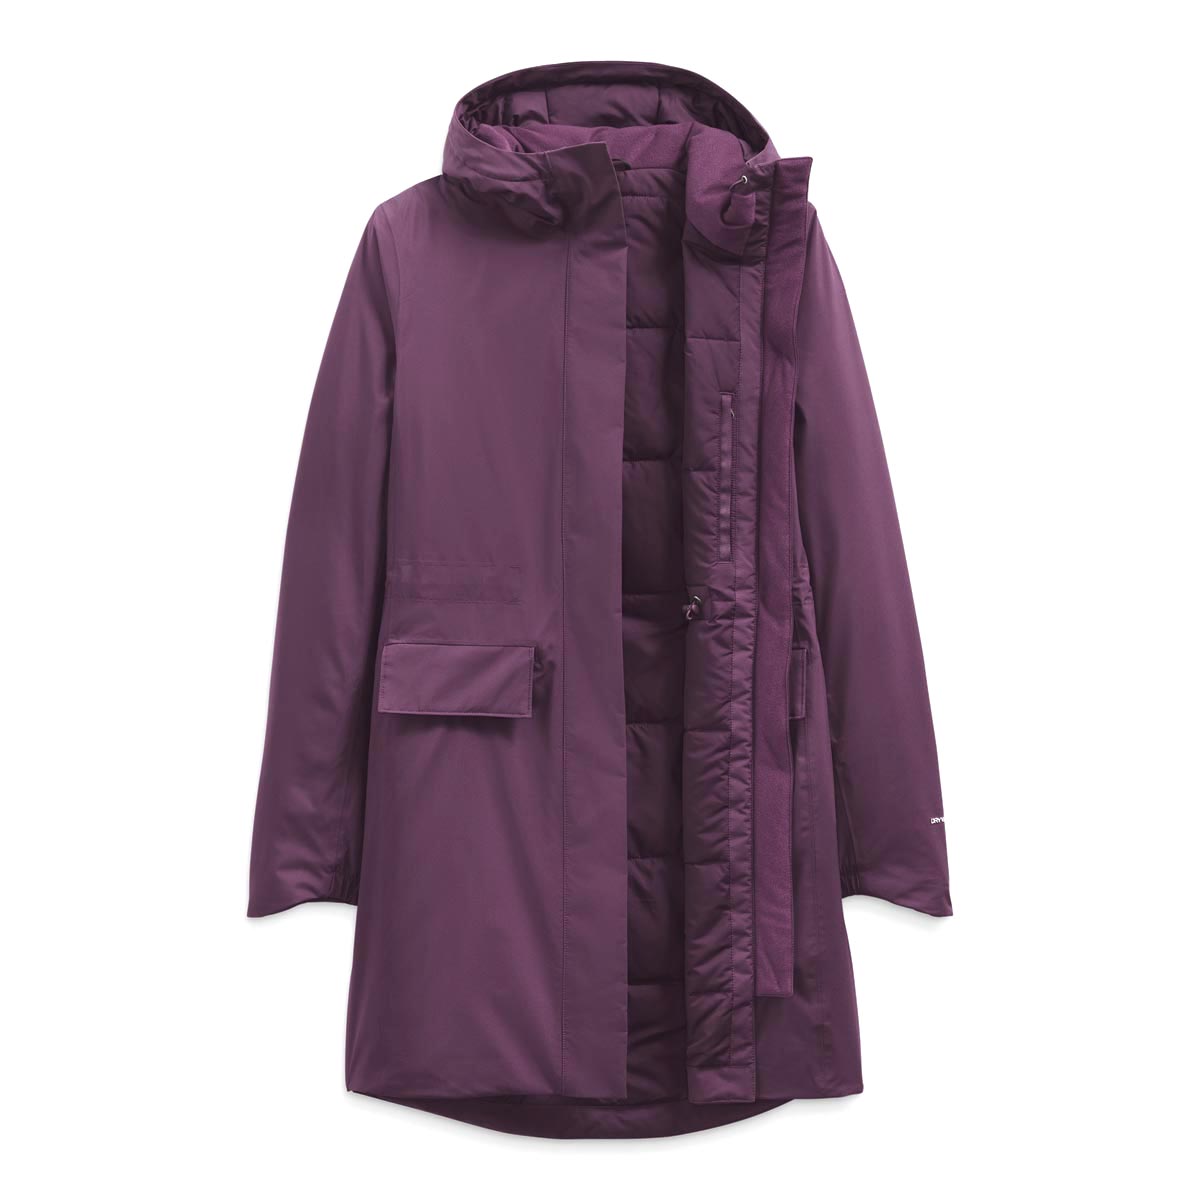 The North Face Women's City Breeze Insulated Parka - Past Season